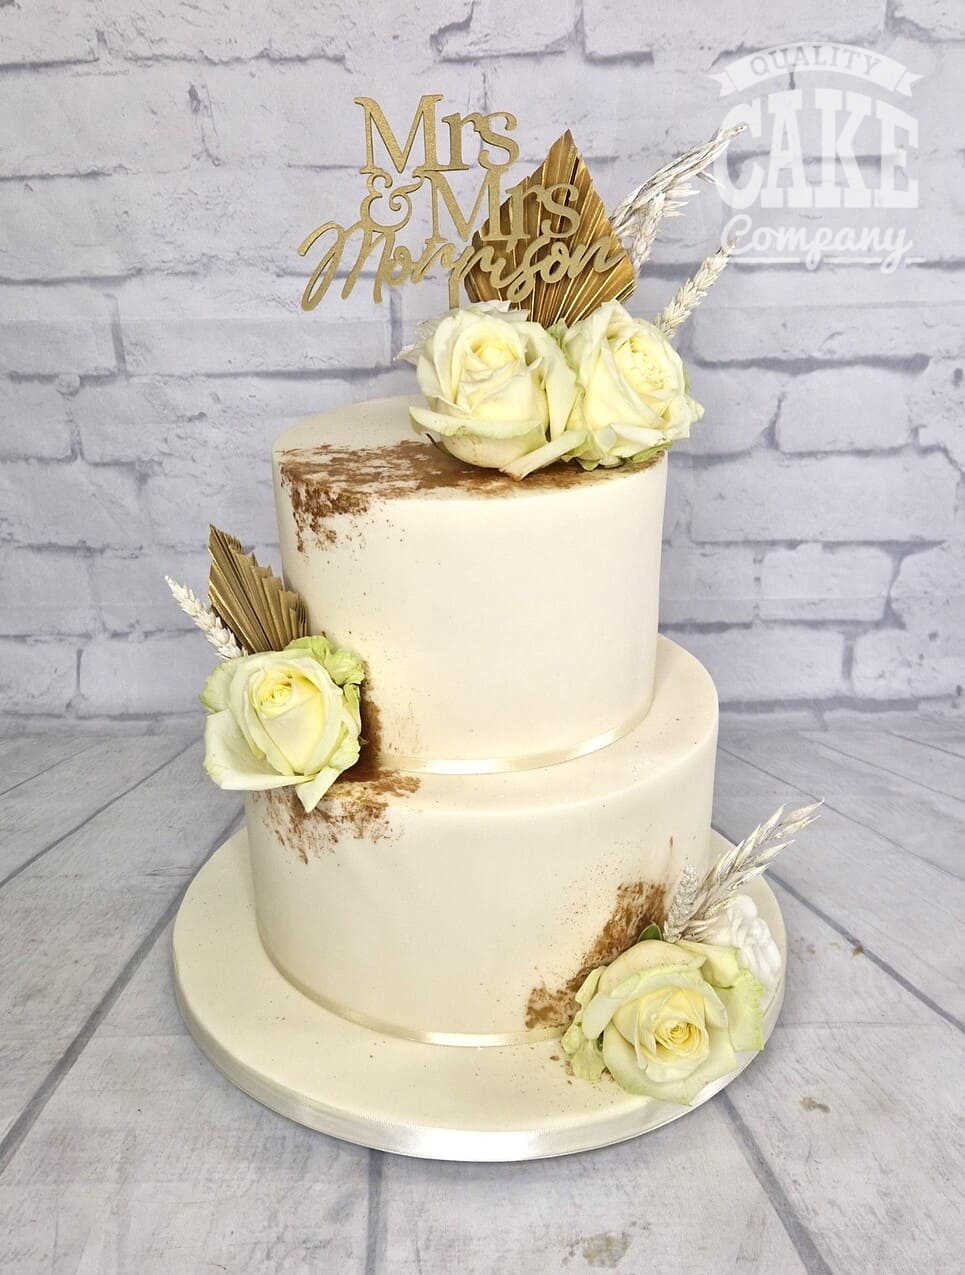 https://qualitycakecompany.com/wp-content/uploads/2022/12/Two-tier-wedding-gold-and-ivory.jpg